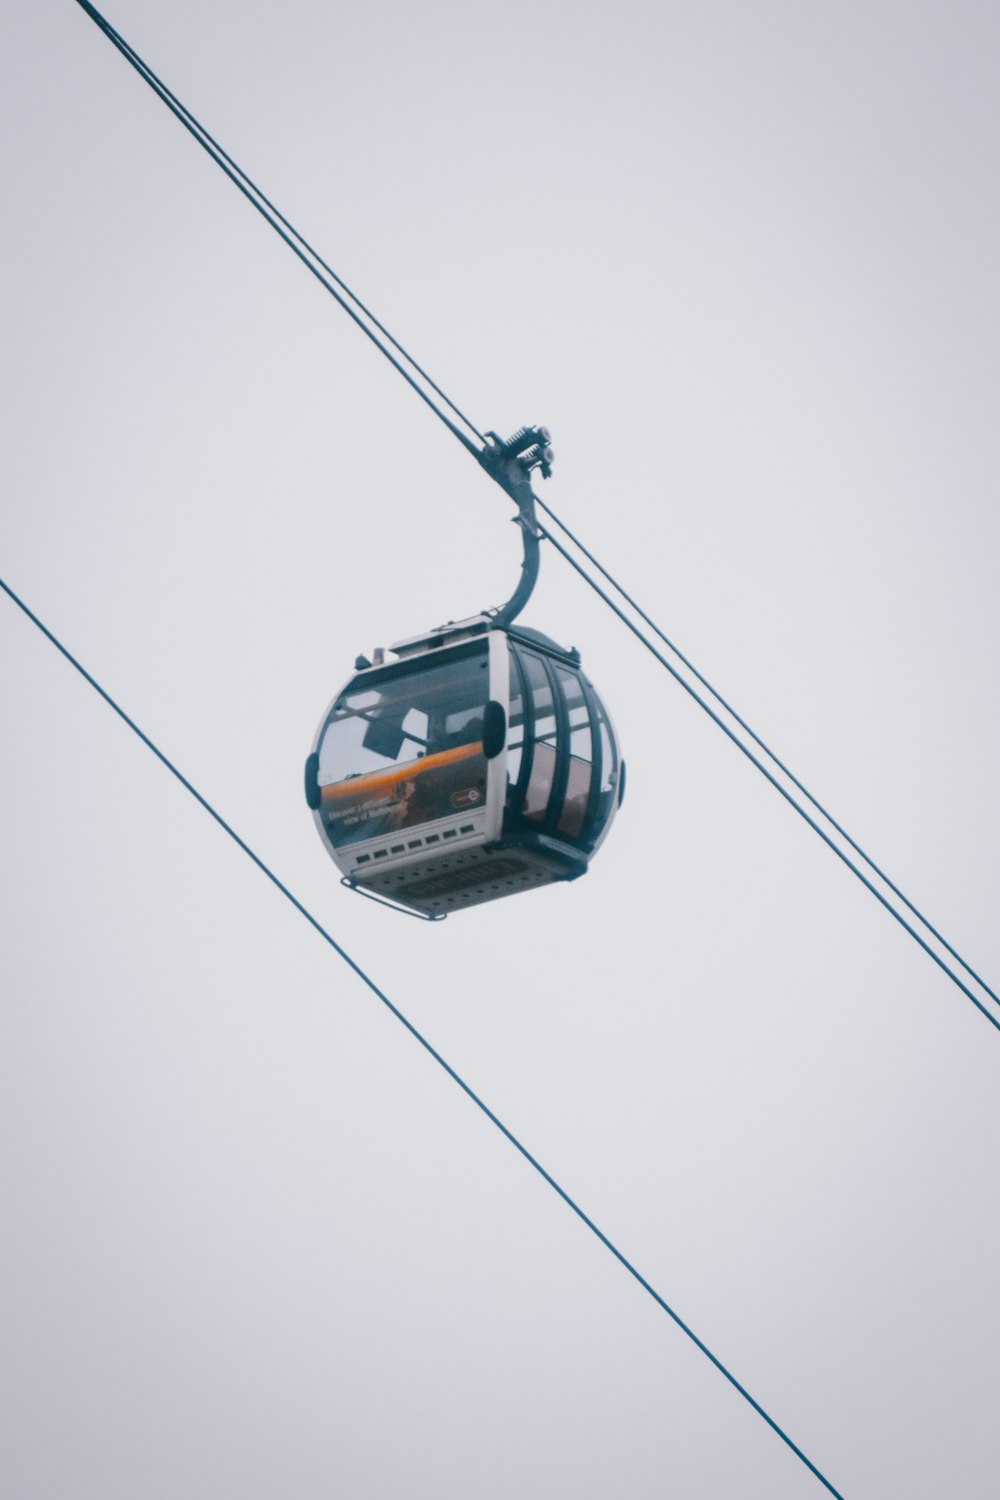 a cable car with a cable attached